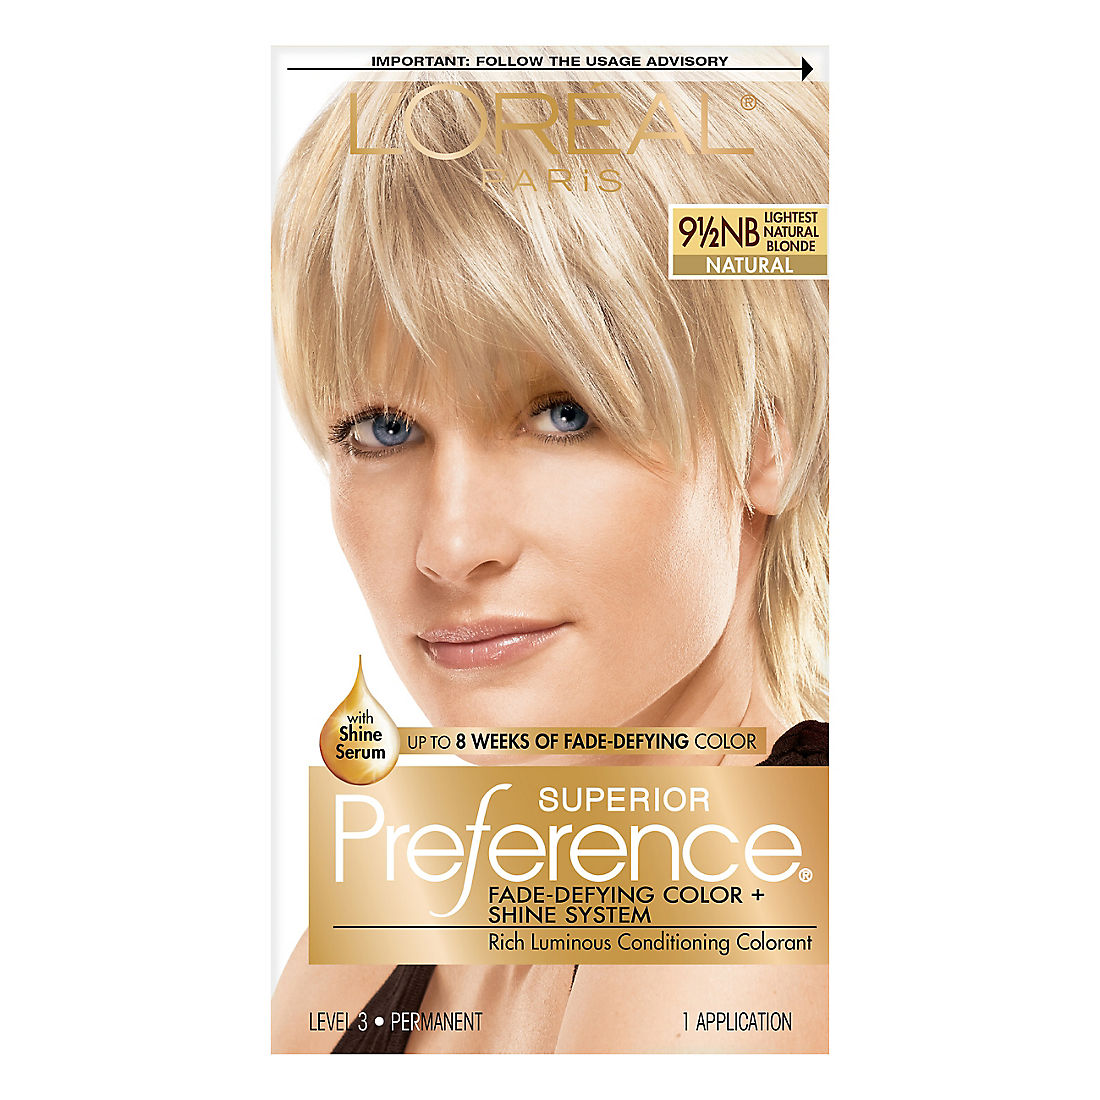 L Oreal Preference Hair Color - BJs Wholesale Club